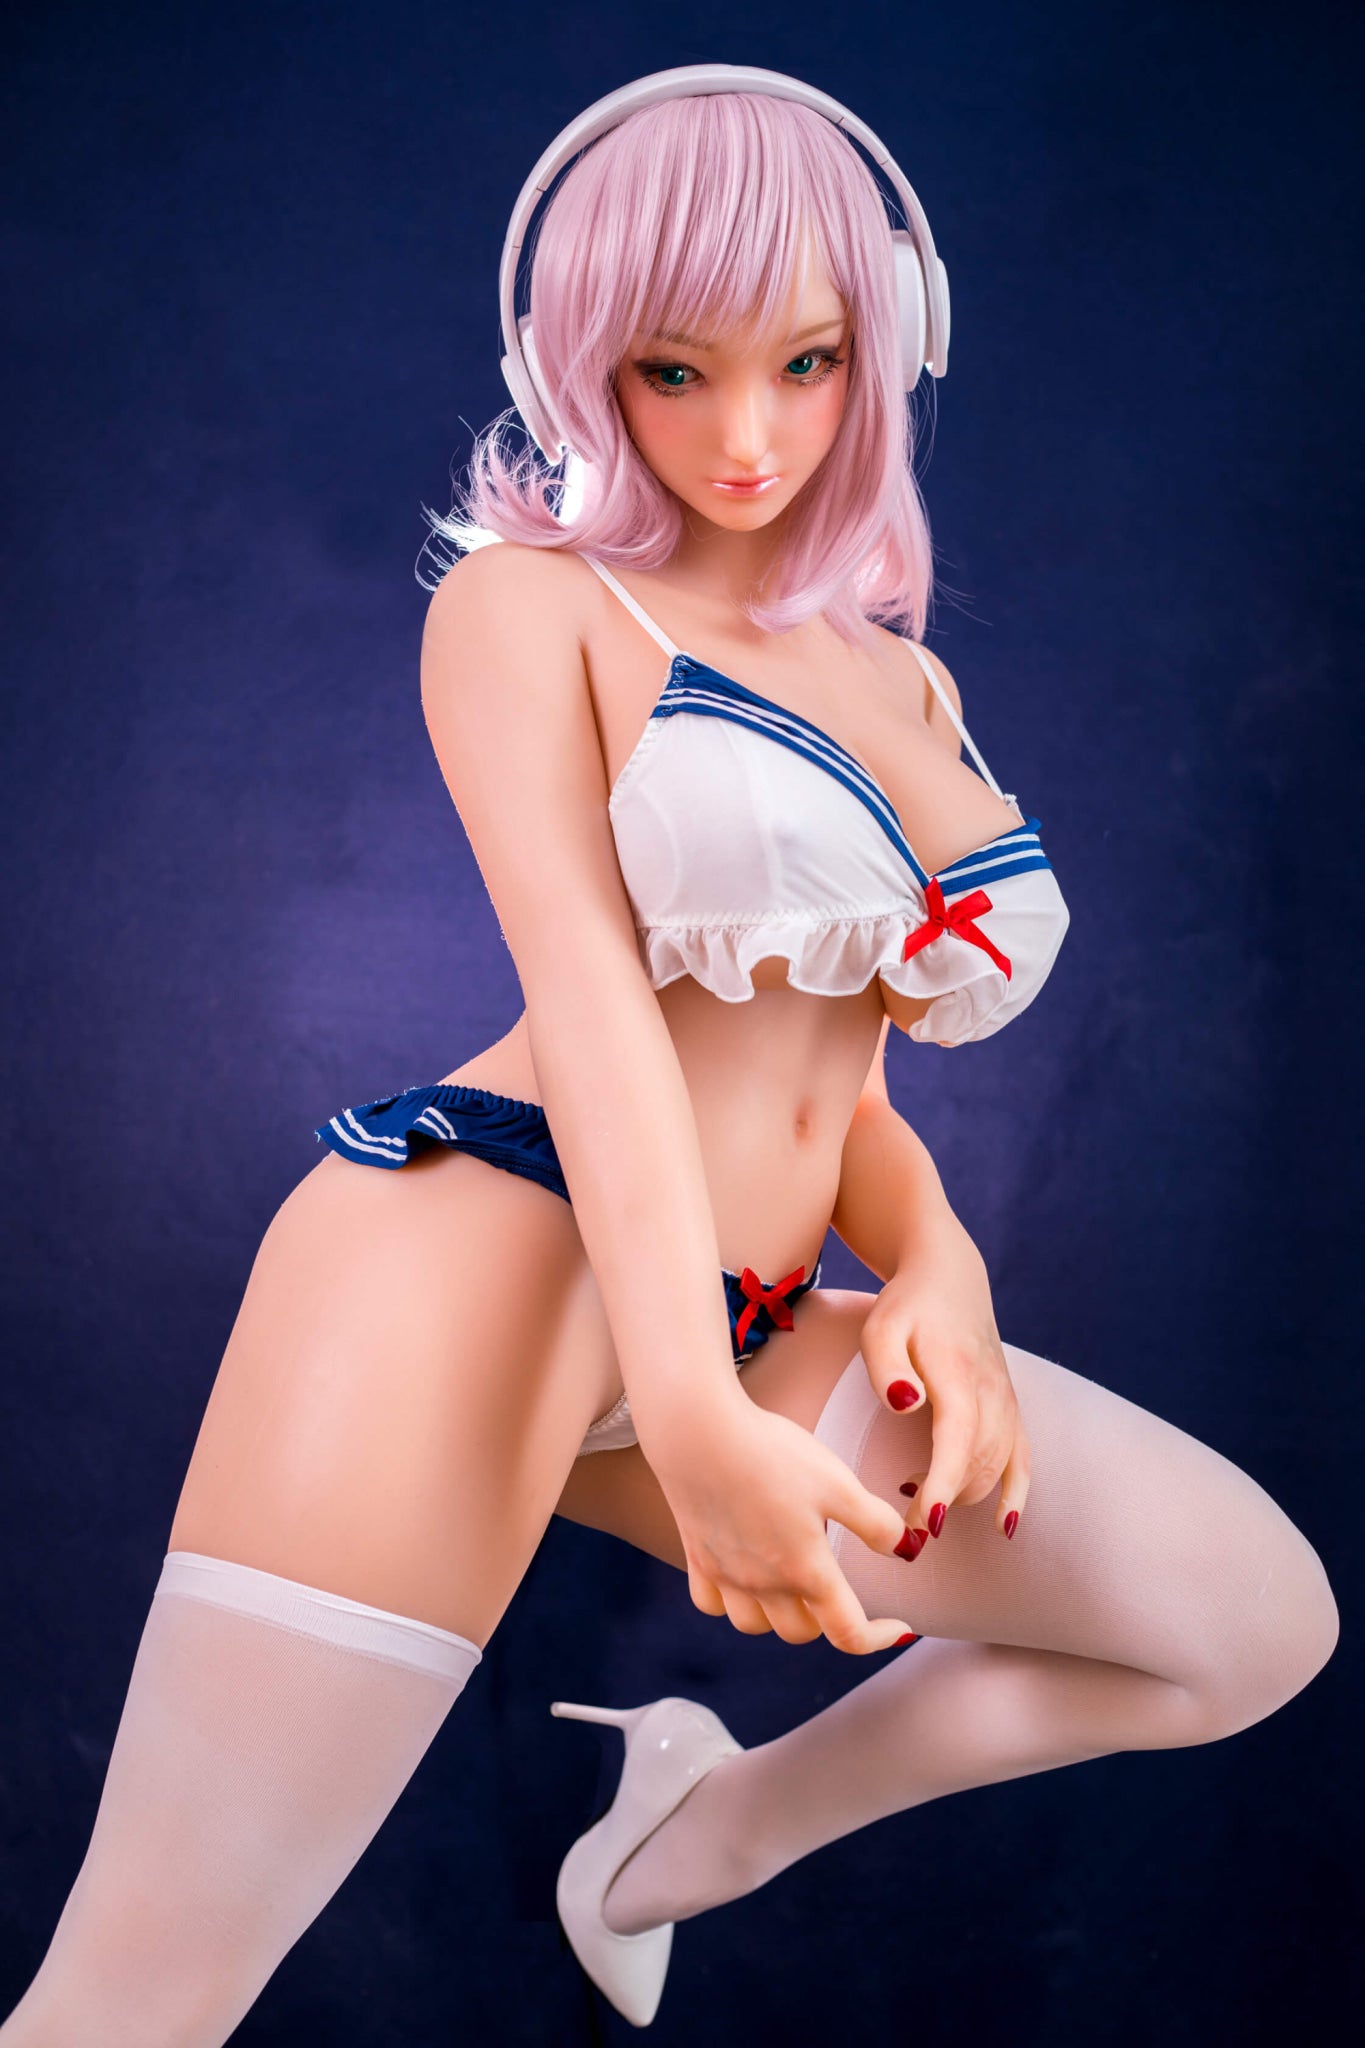 Mo 155cm / 5ft1 |S22| I-Cup Sino-doll Sino-doll